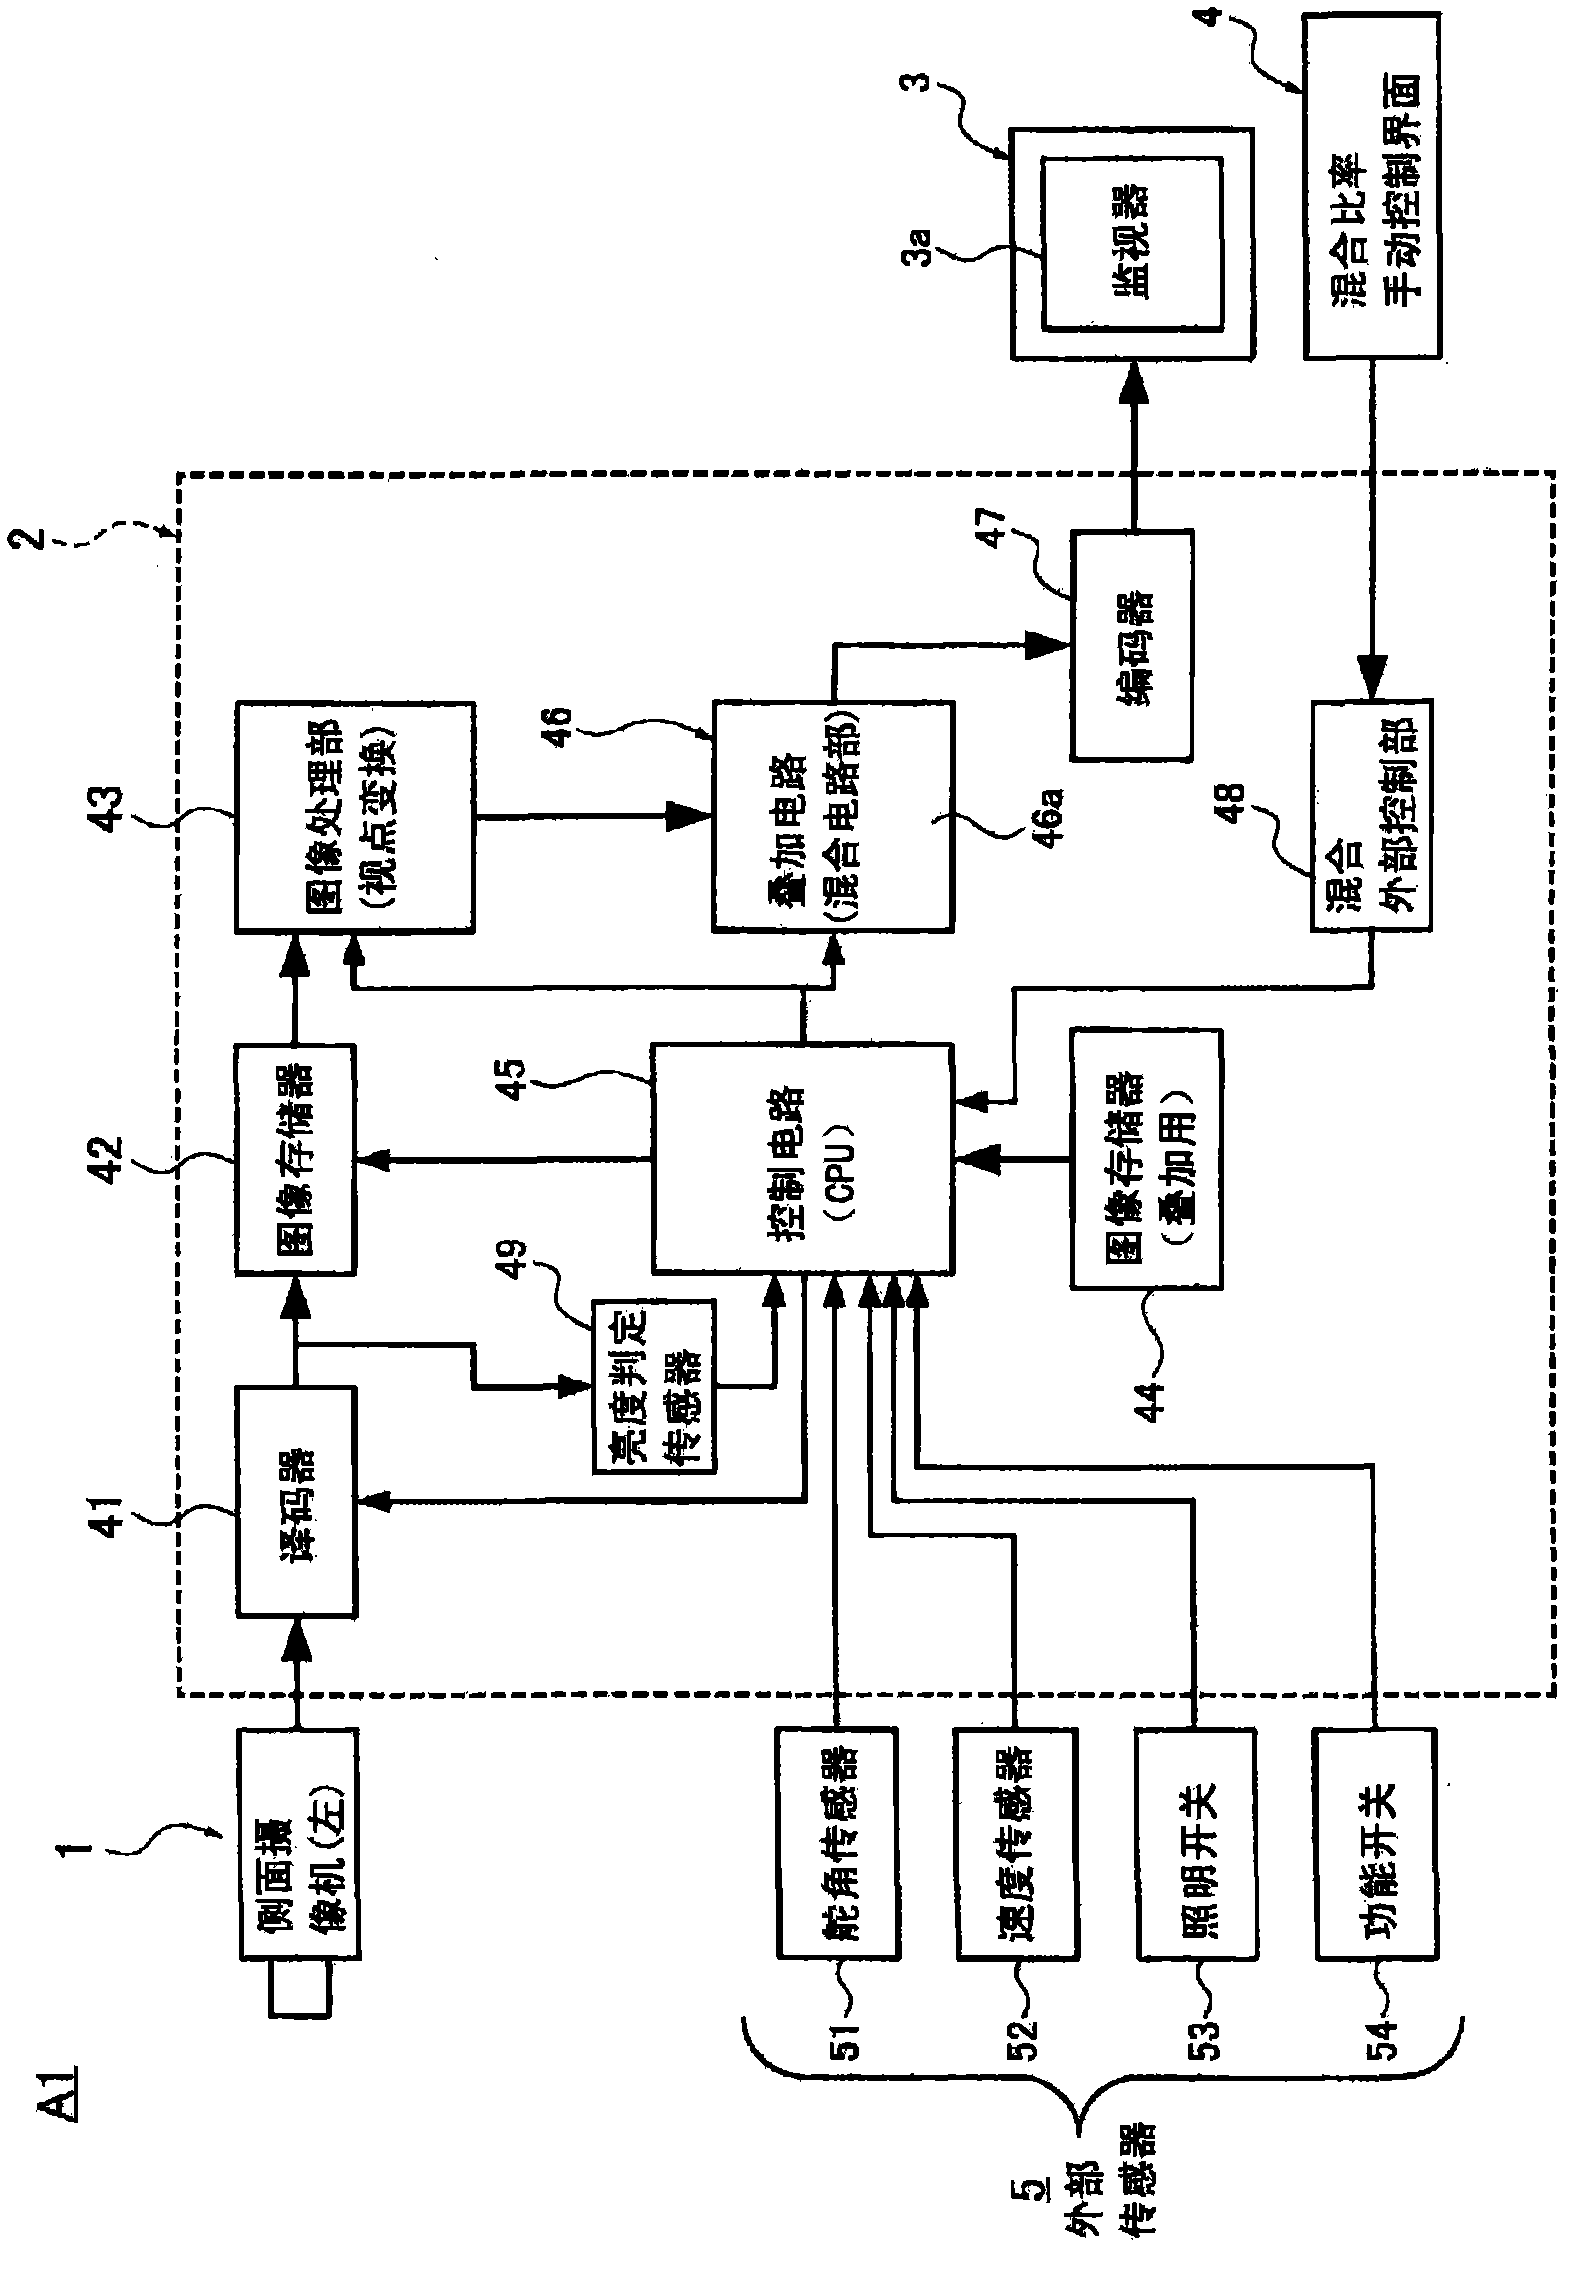 A vehicle virtual composite display system